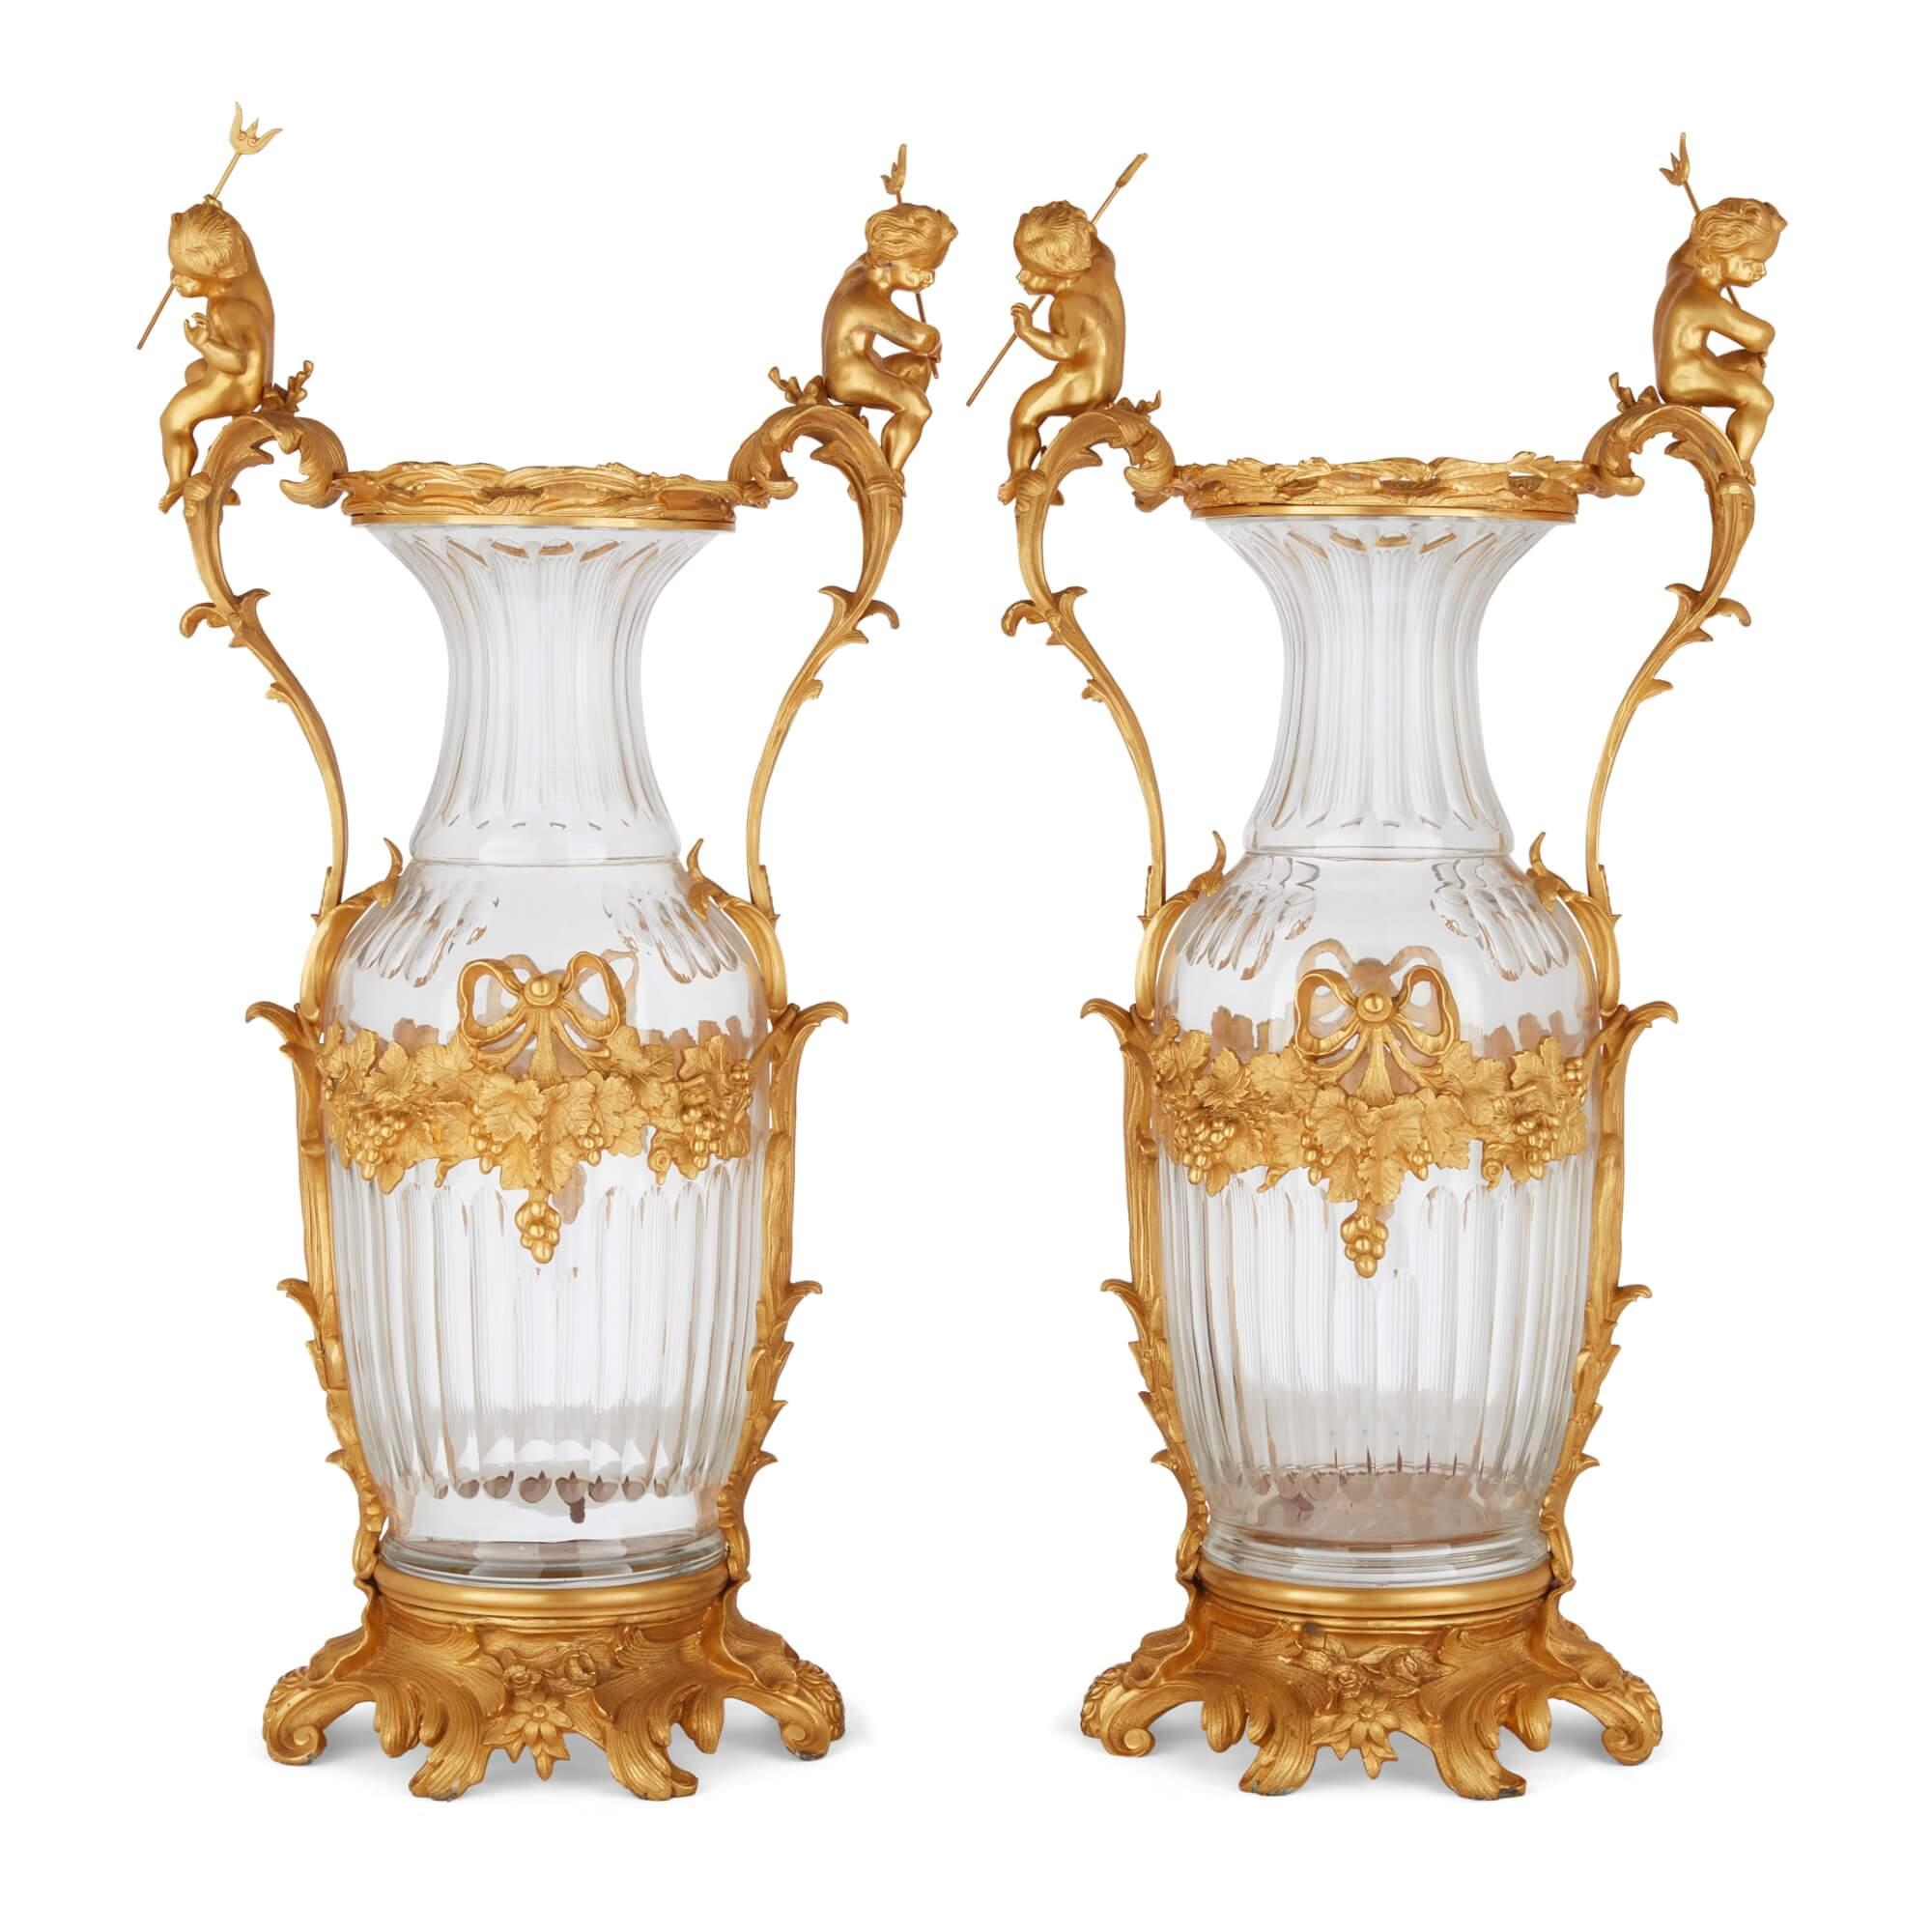 Large pair of French Rococo style ormolu-mounted cut glass vases 
French, 20th Century 
Height 89cm, width 43cm, depth 32cm

The vases are crafted from high quality materials, their design celebrating the French 18th century Rococo style. 

The cut